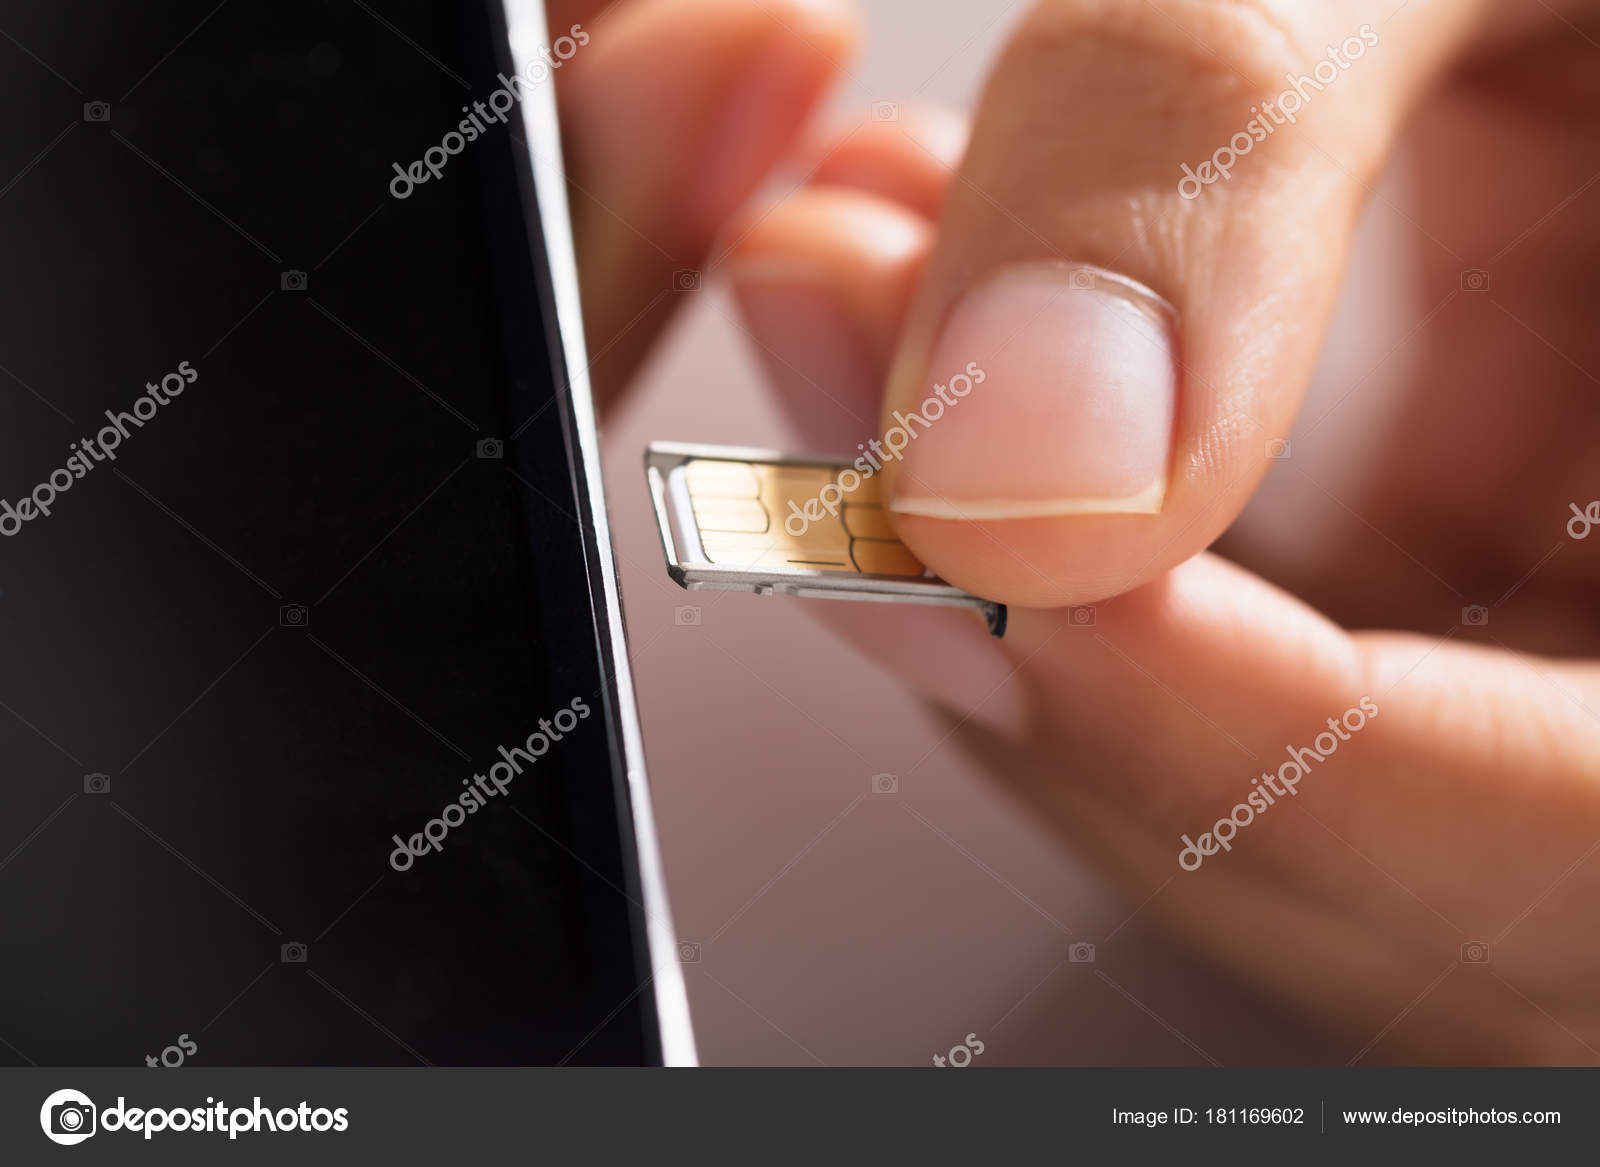  A person carefully inserts a SIM card into the side of a mobile phone.